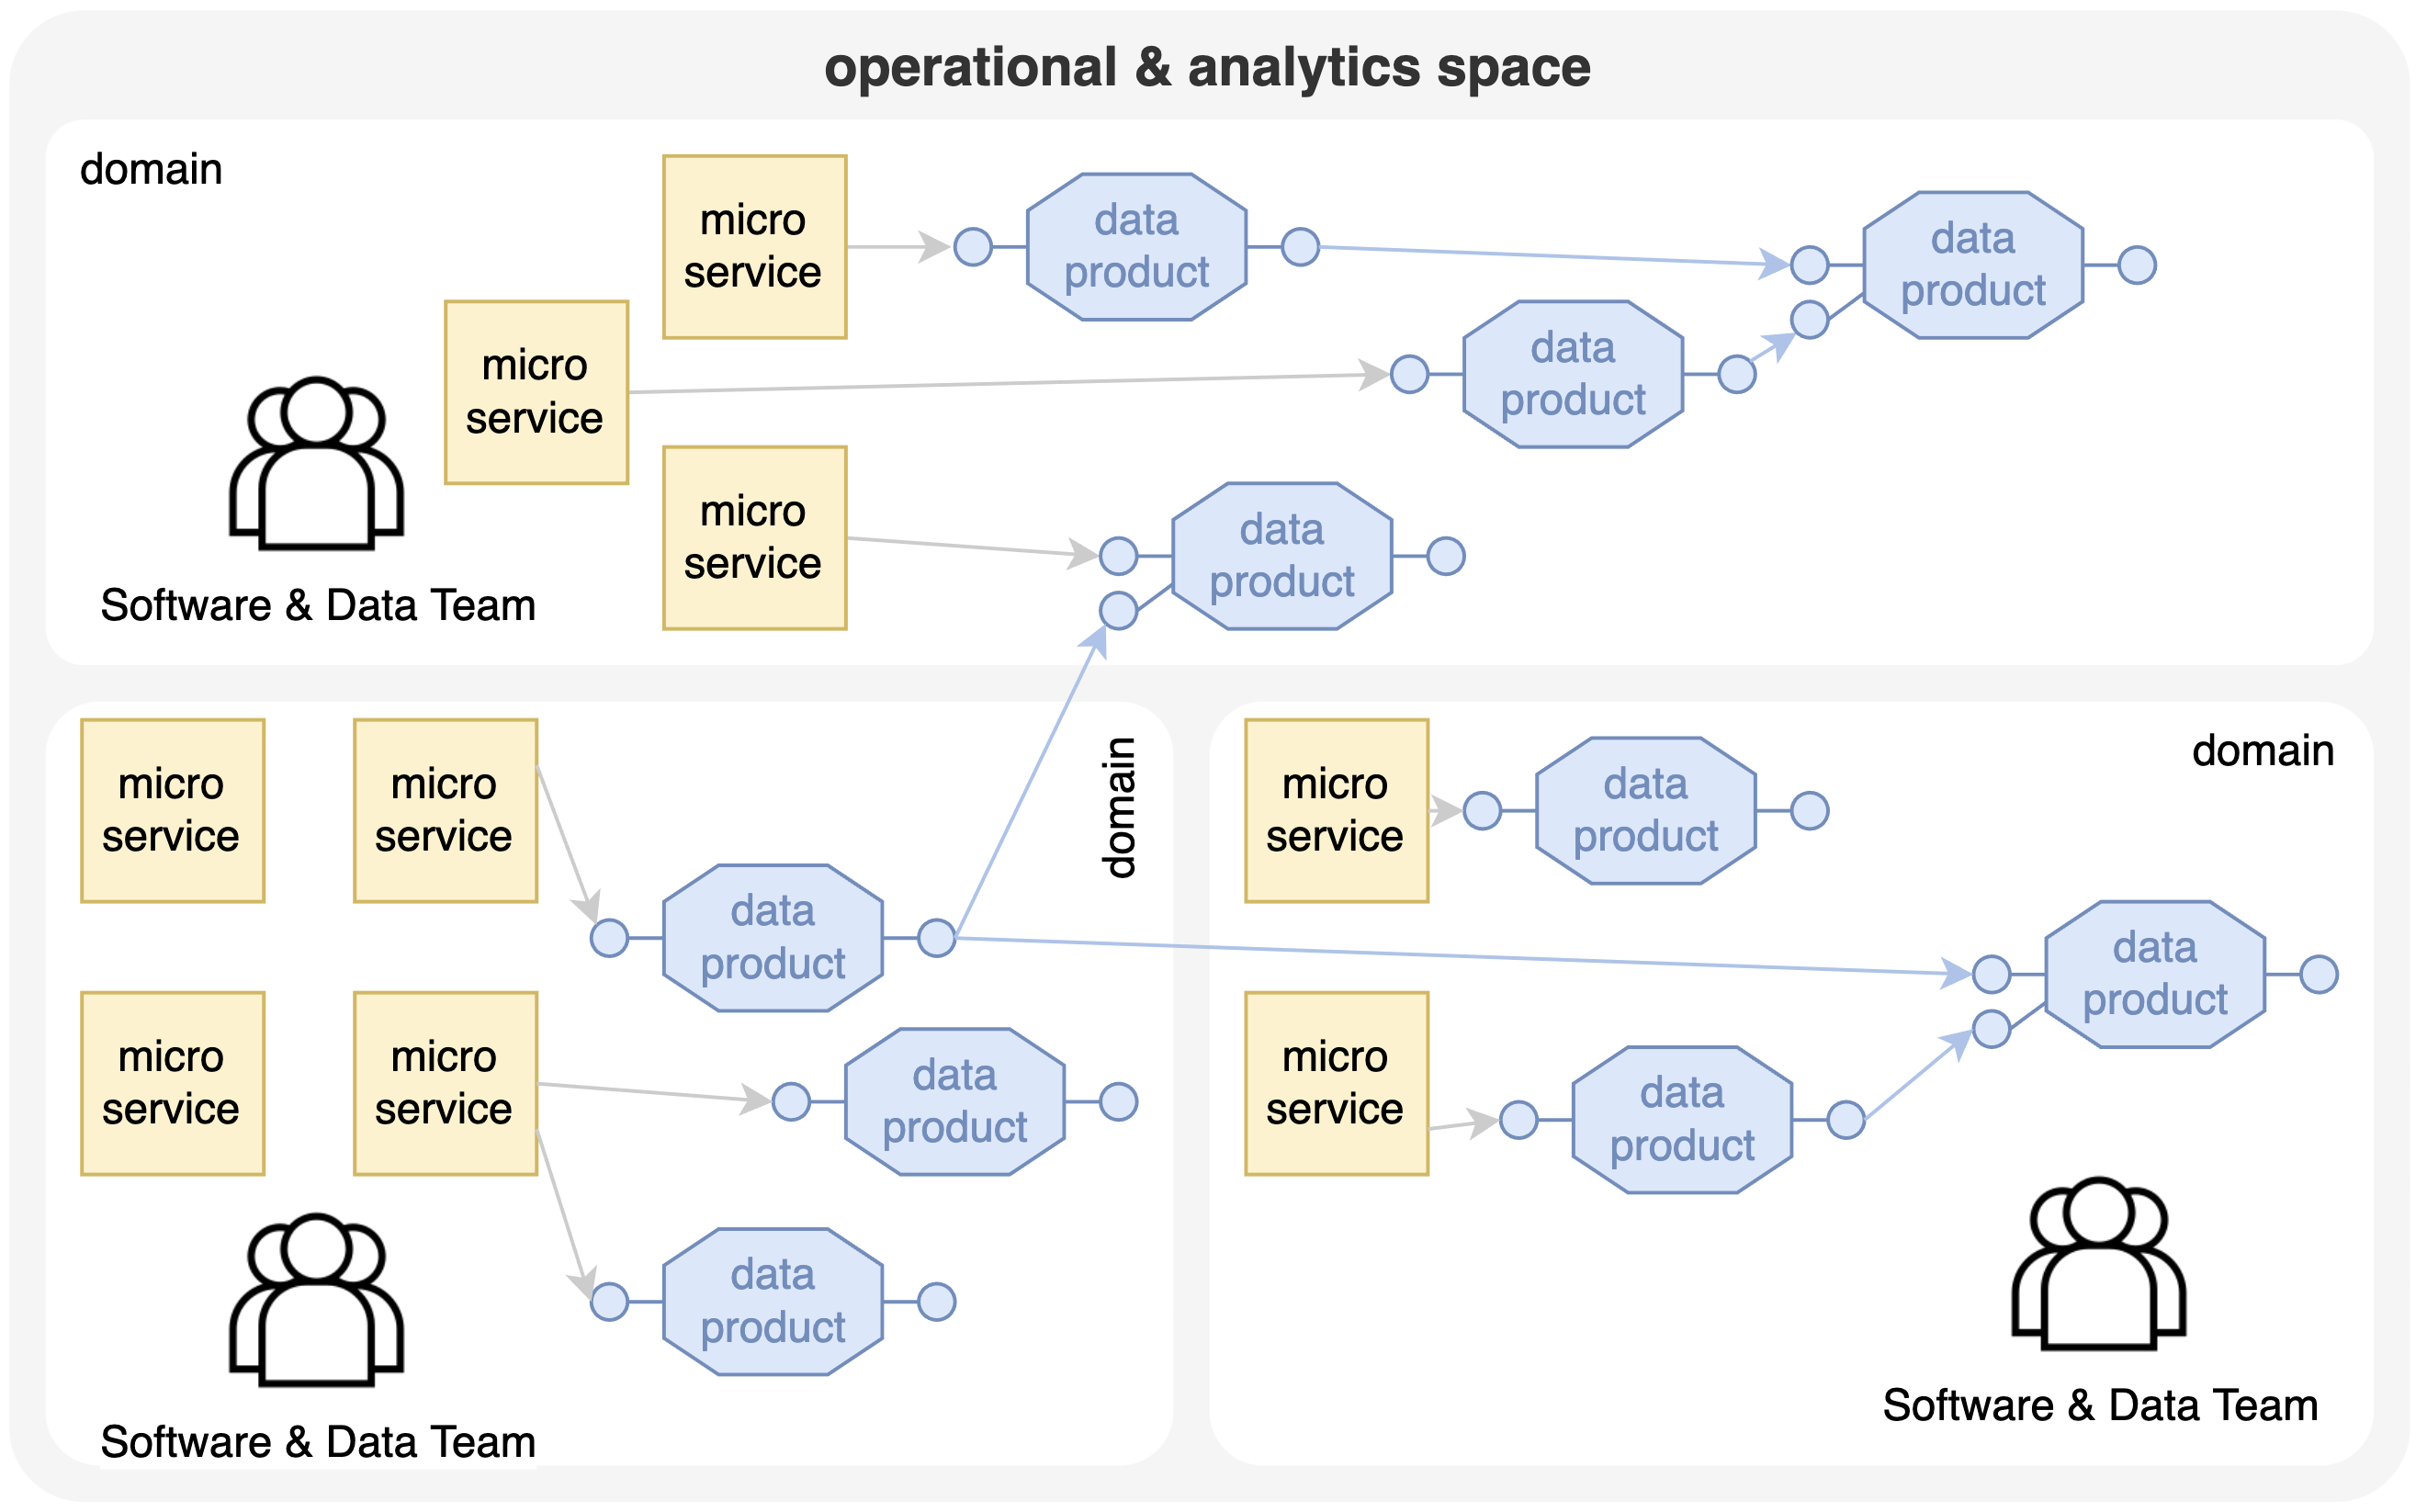 Schema illustrating Operational space